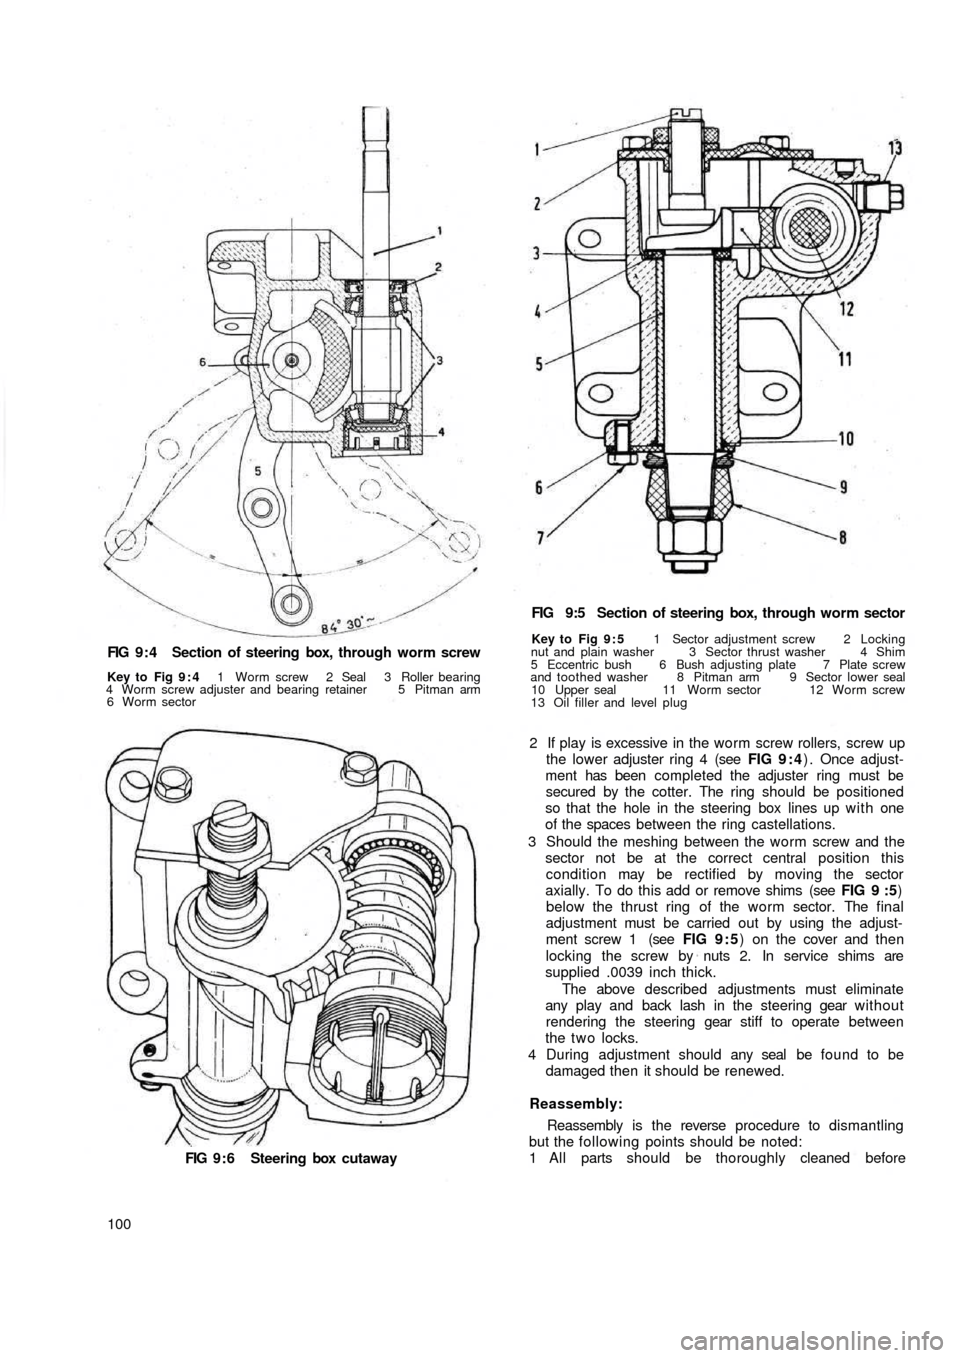 FIAT 500 1966 1.G Workshop Manual FIG 9 : 4  Section of steering box,  through worm screw
Key to  Fig 9 : 4 1 Worm screw 2 Seal 3 Roller bearing
4 Worm screw adjuster and bearing retainer 5 Pitman arm
6 Worm sector
FIG 9 : 6  Steering